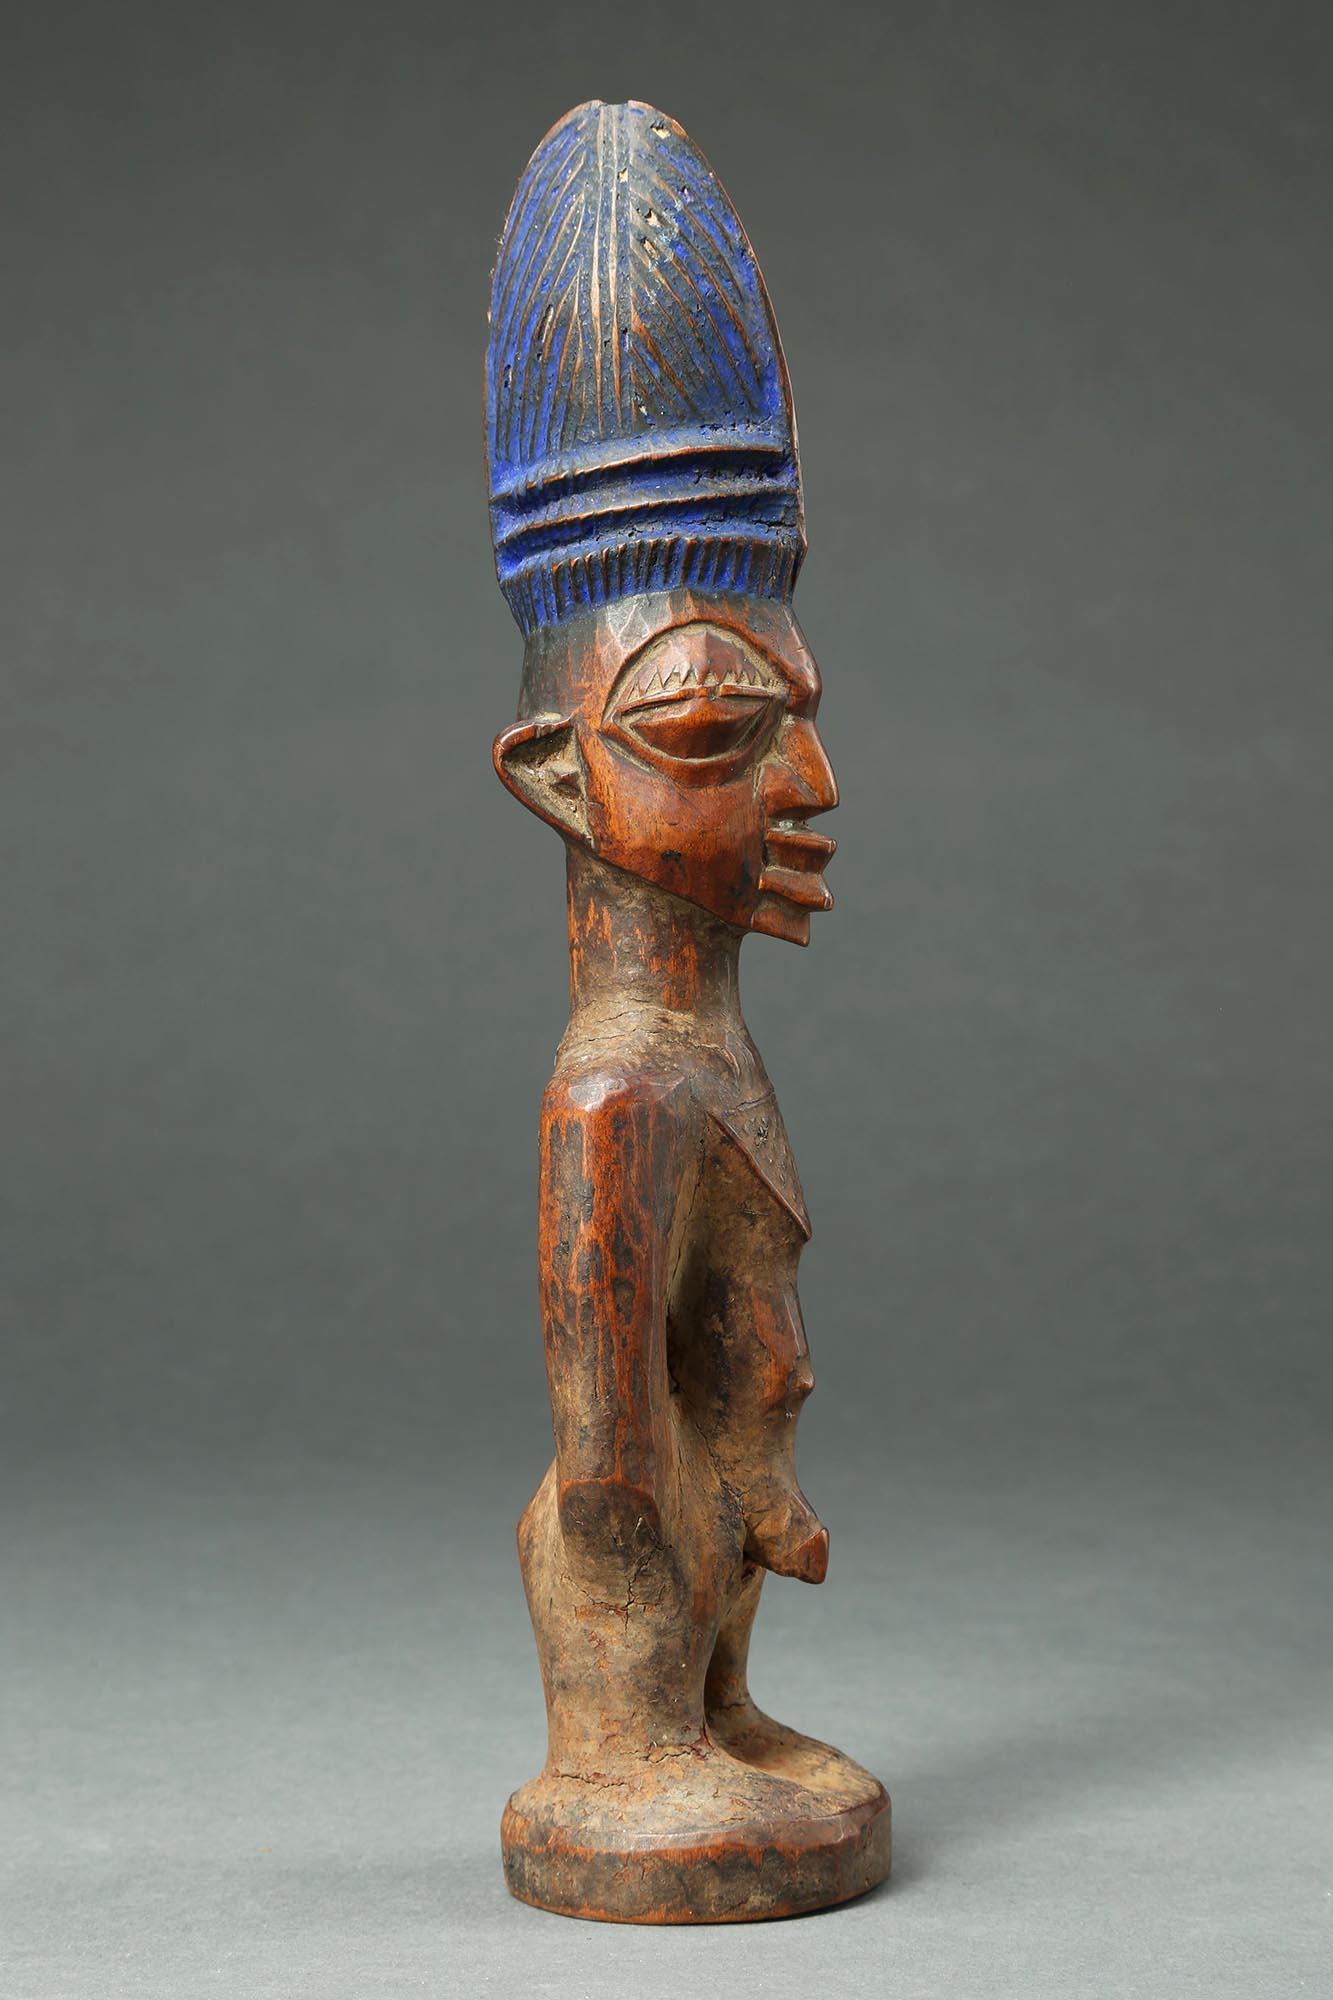 A finely carved male twin figure, ere Ibeji, Yoruba People, Nigeria, created in the early 20th century. 
With a tall plaited coiffure, expressive eyes, and extensive wear and polish from native use. Areas of encrusted camwood powder between arms and